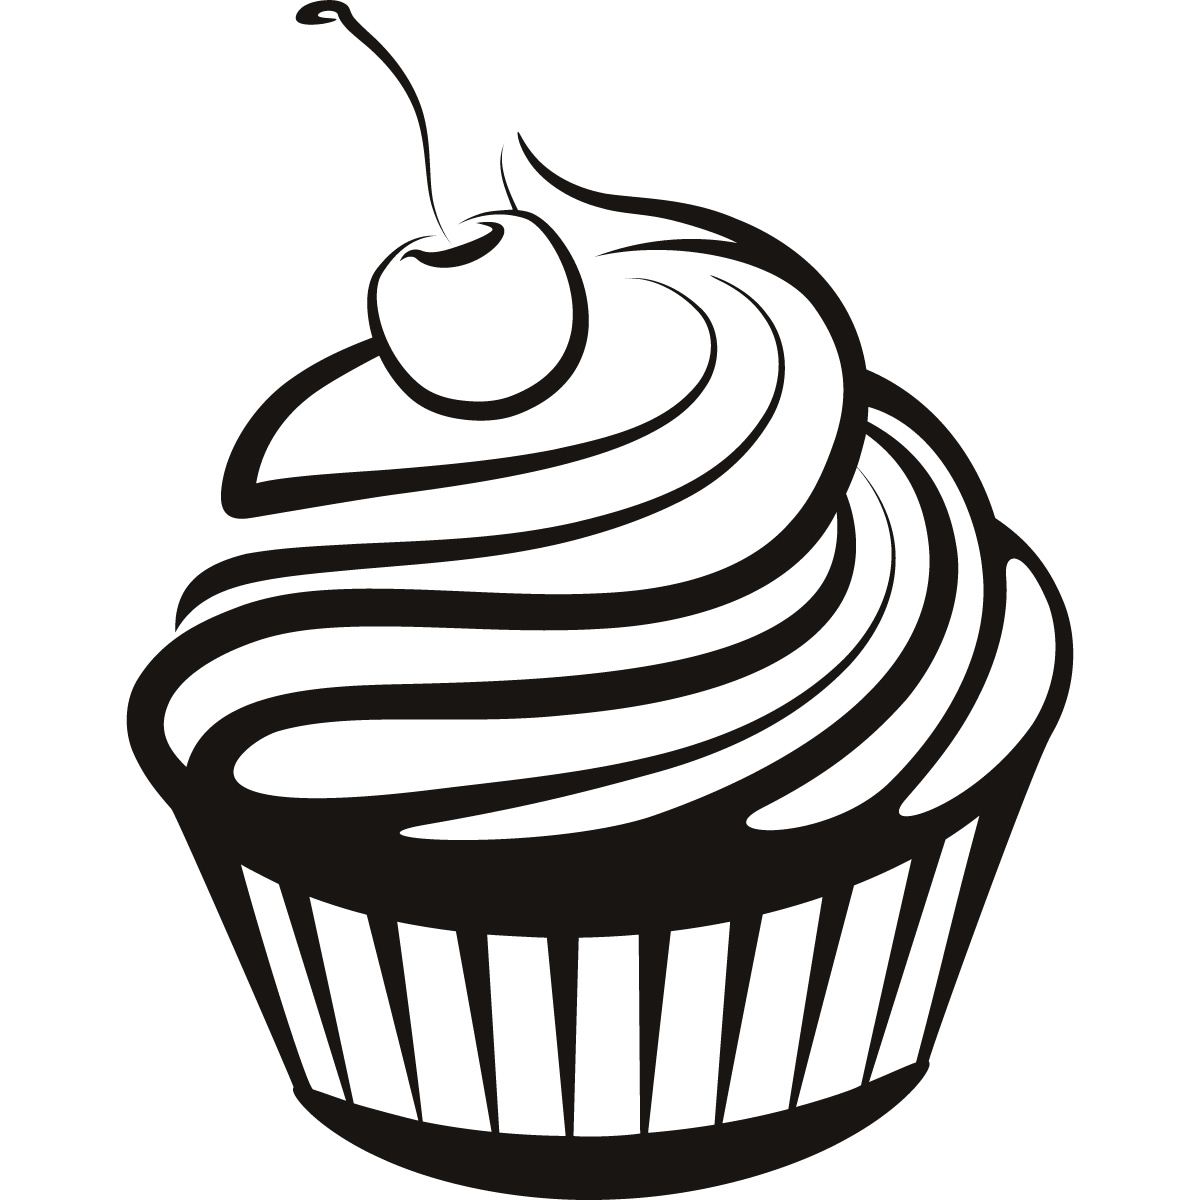 Cupcake black and white cupcake drawings and cupcakes clipart